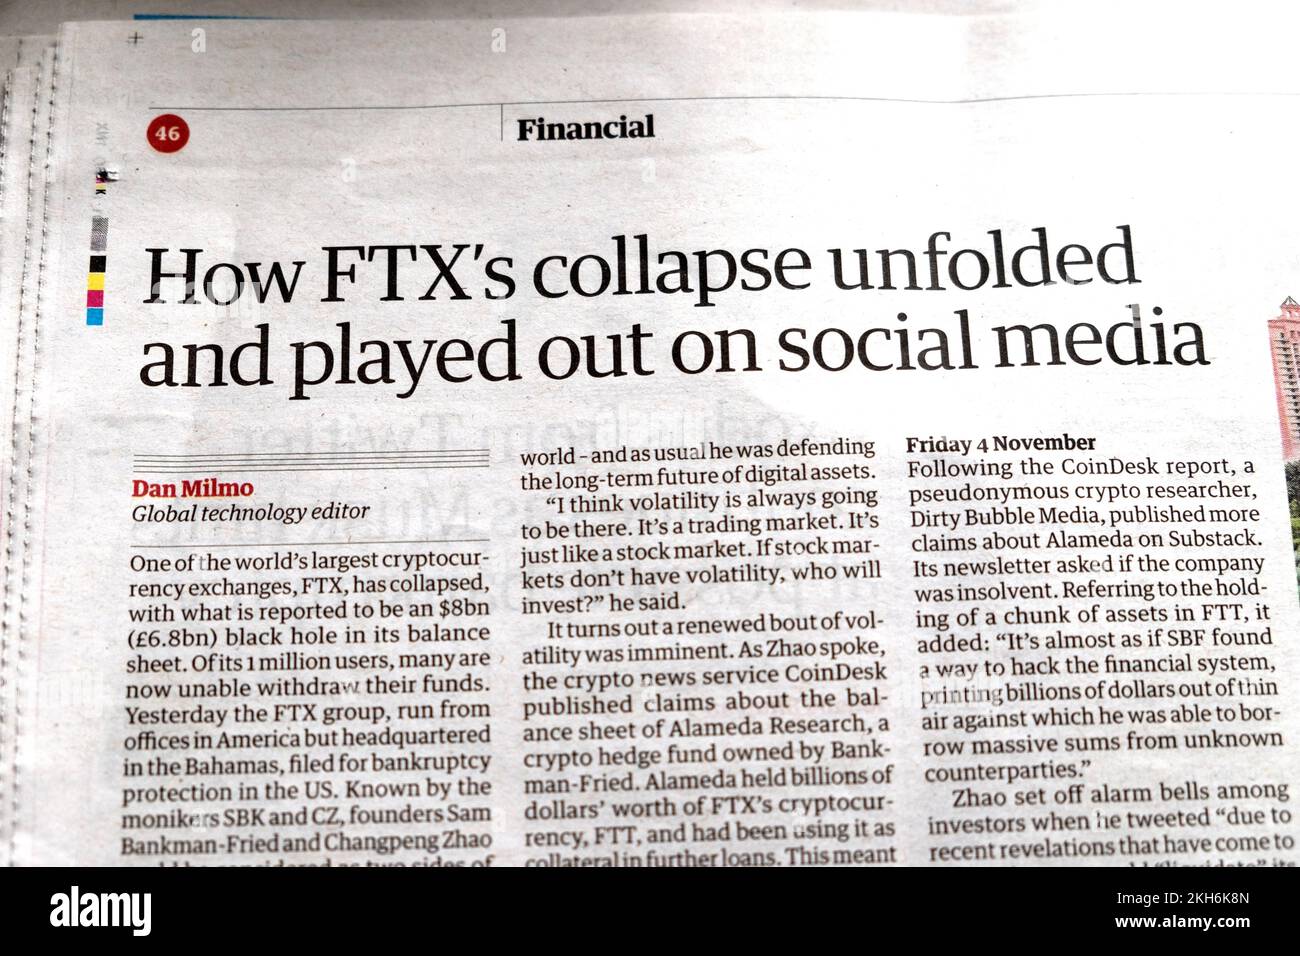 „How FTX's Collapse develop and play out on Social Media“, Titelzeile der Zeitung Guardian, Cryptocurrency, Artikel November 2022, London UK Stockfoto